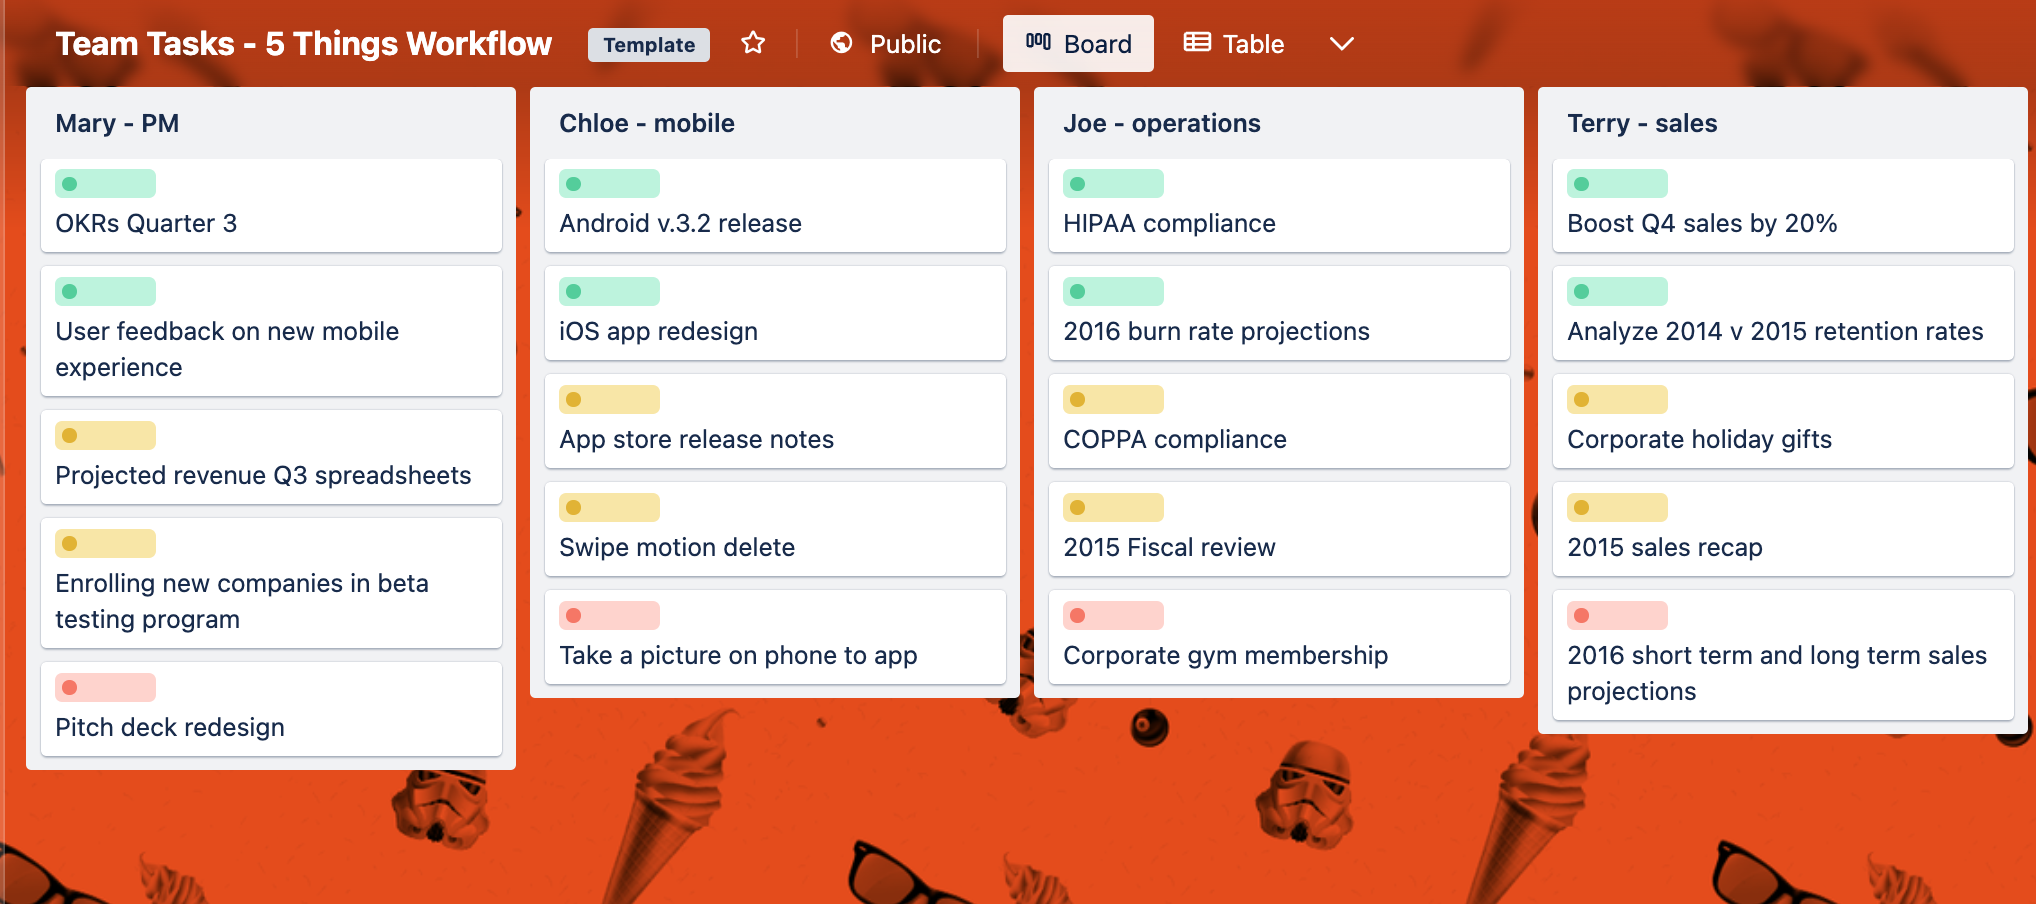 5 things workflow Trello template